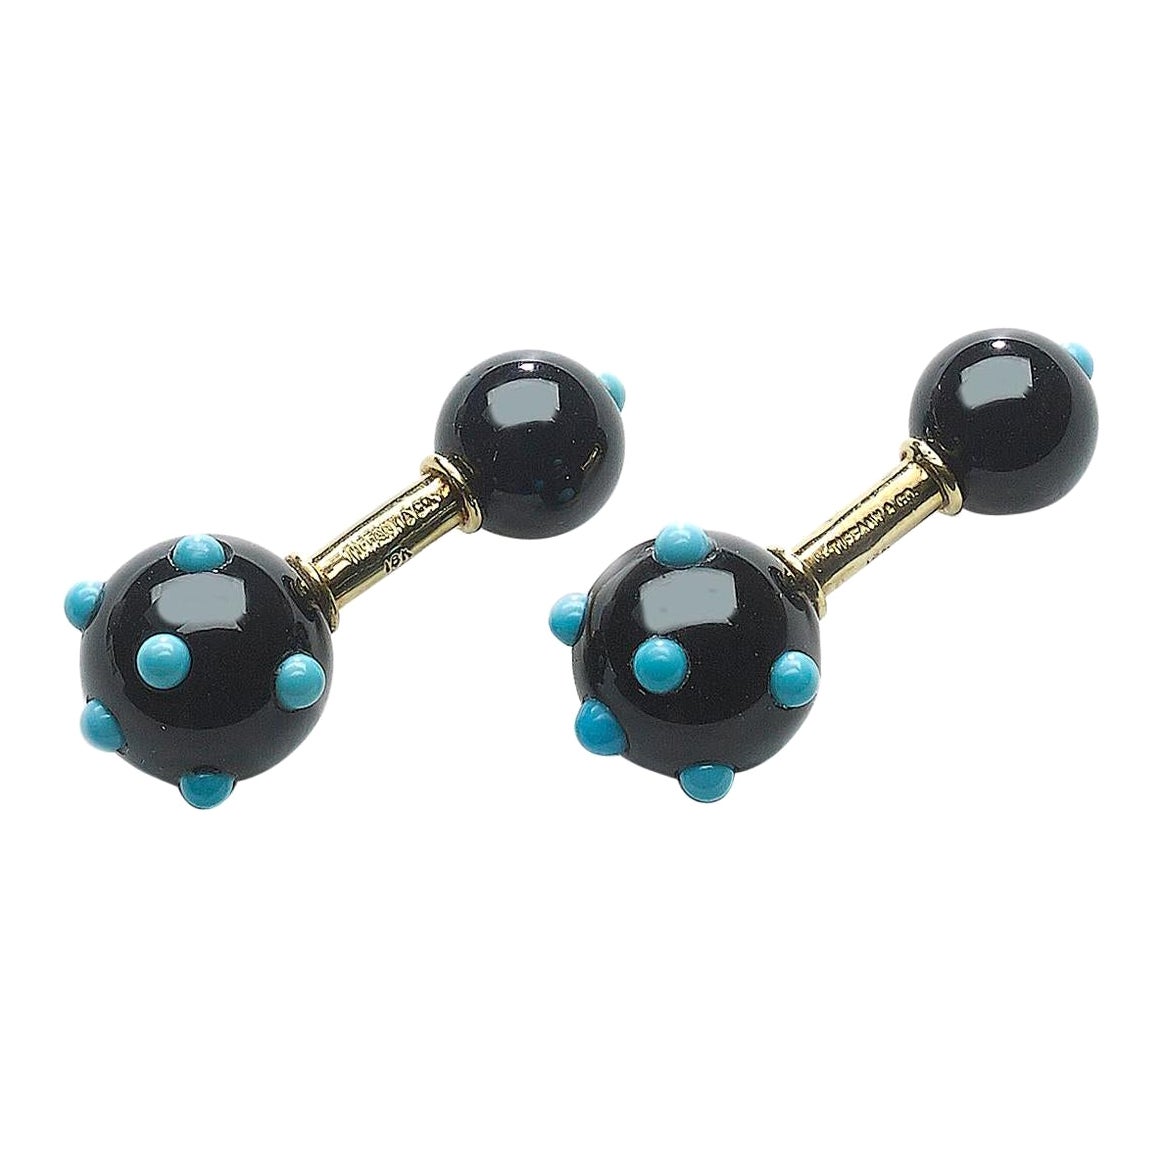 Tiffany Schlumberger Cufflinks with Black Onyx, Turquoise and Gold, Circa 1960